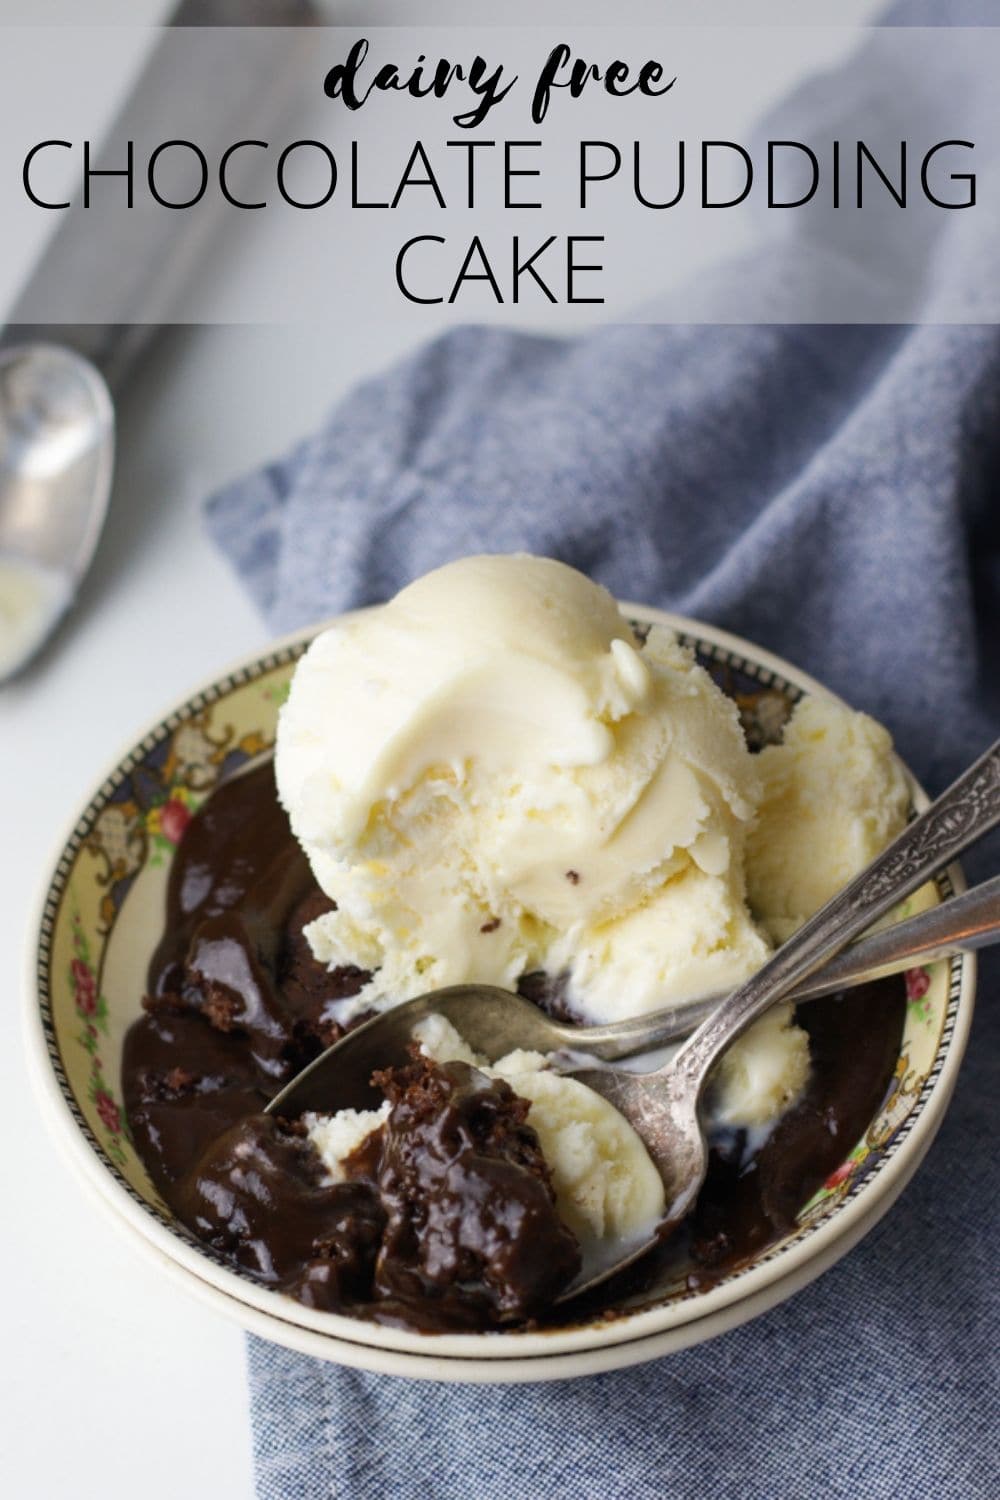 This dairy free chocolate pudding cake is gooey, rich, chocolatey goodness that you won't feel one bit deprived eating! Also called brownie pudding, hot fudge cake, and chocolate cobbler, this cake is delicious no matter what you call it! #castironrecipe #chocolatecobbler